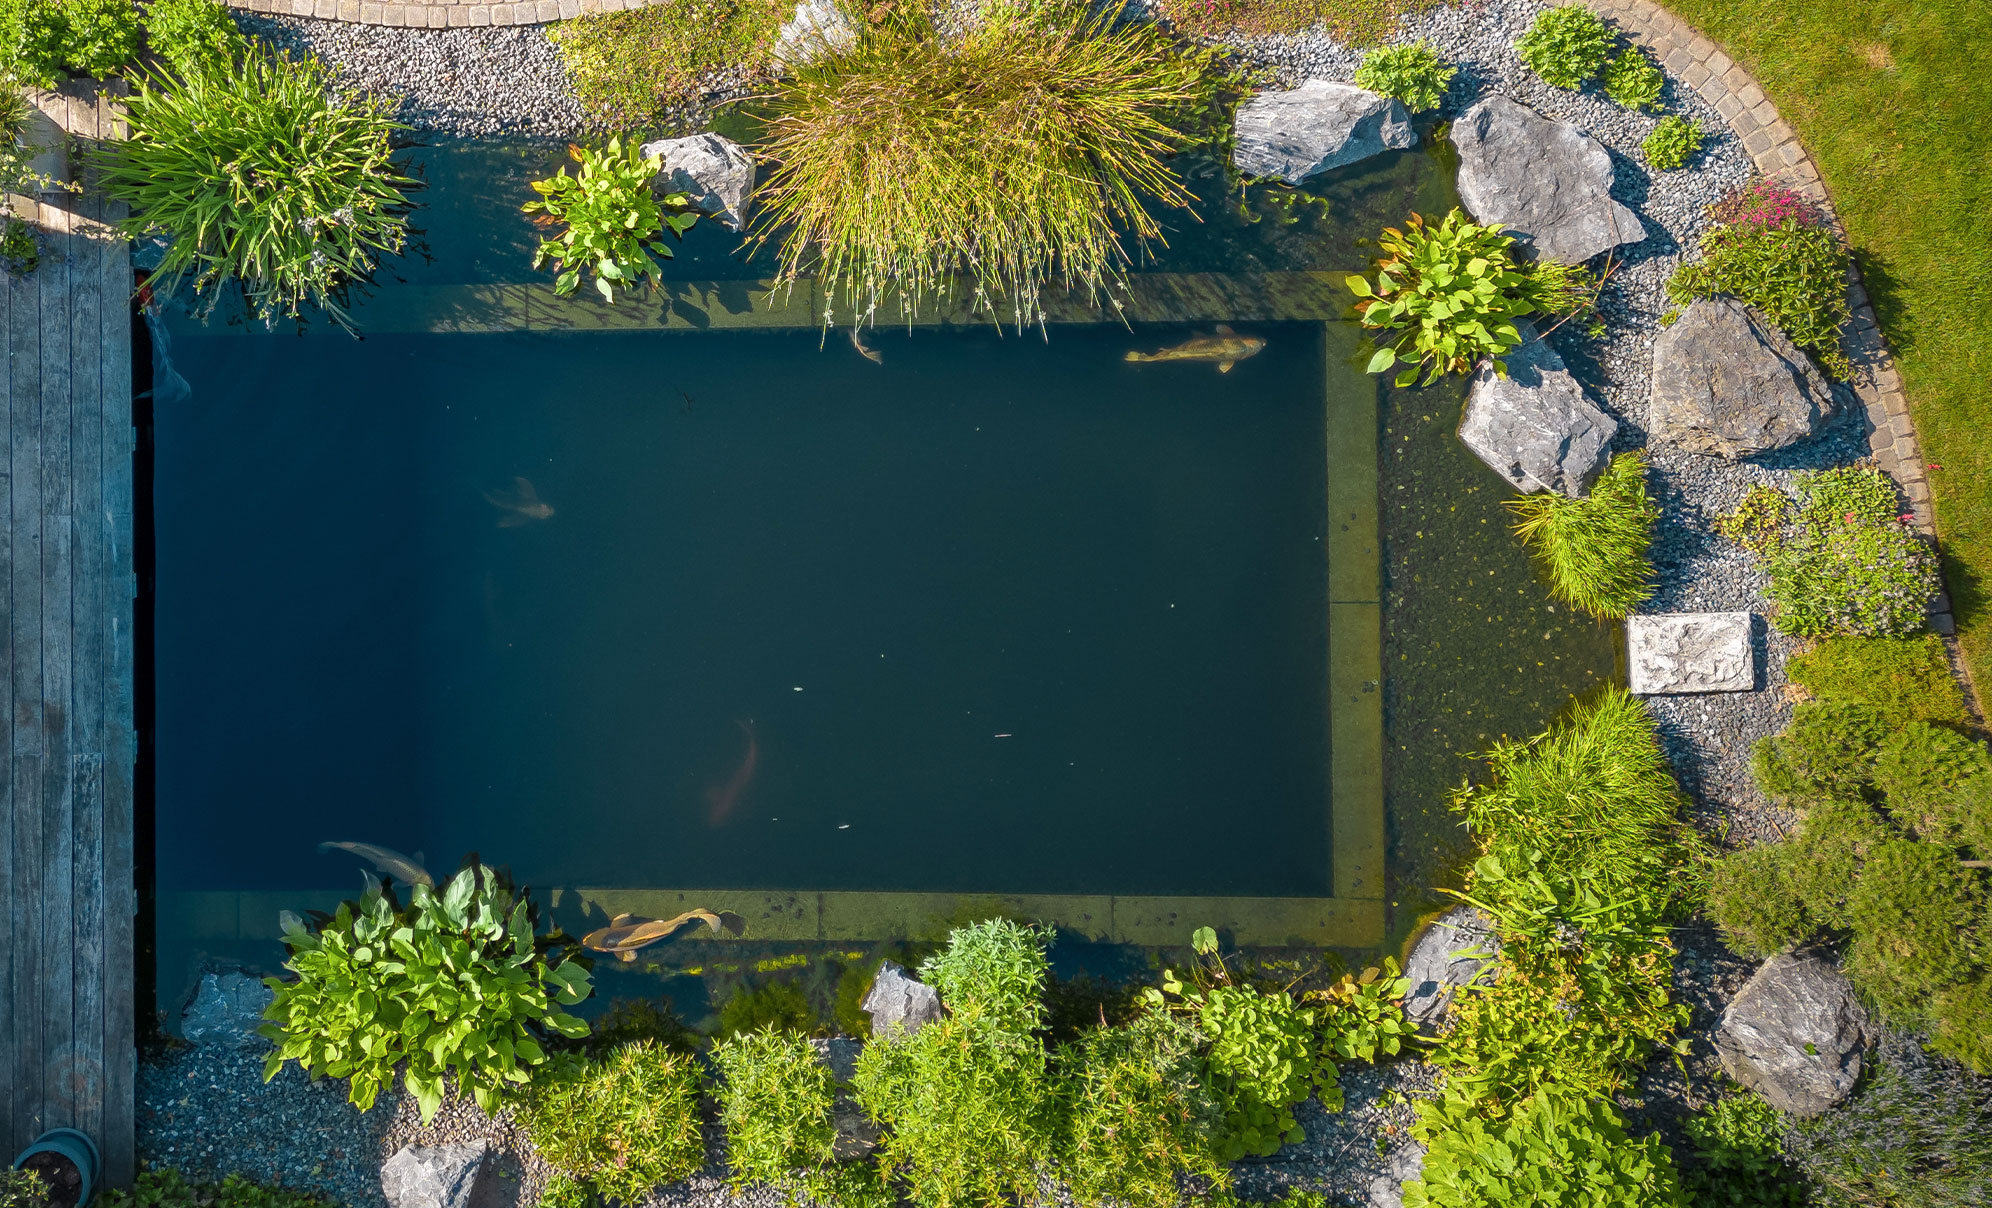 Aerial view of a rectangular garden pond surrounded by lush vegetation, rocks, and gravel paths, with fish visible swimming in the clear water.